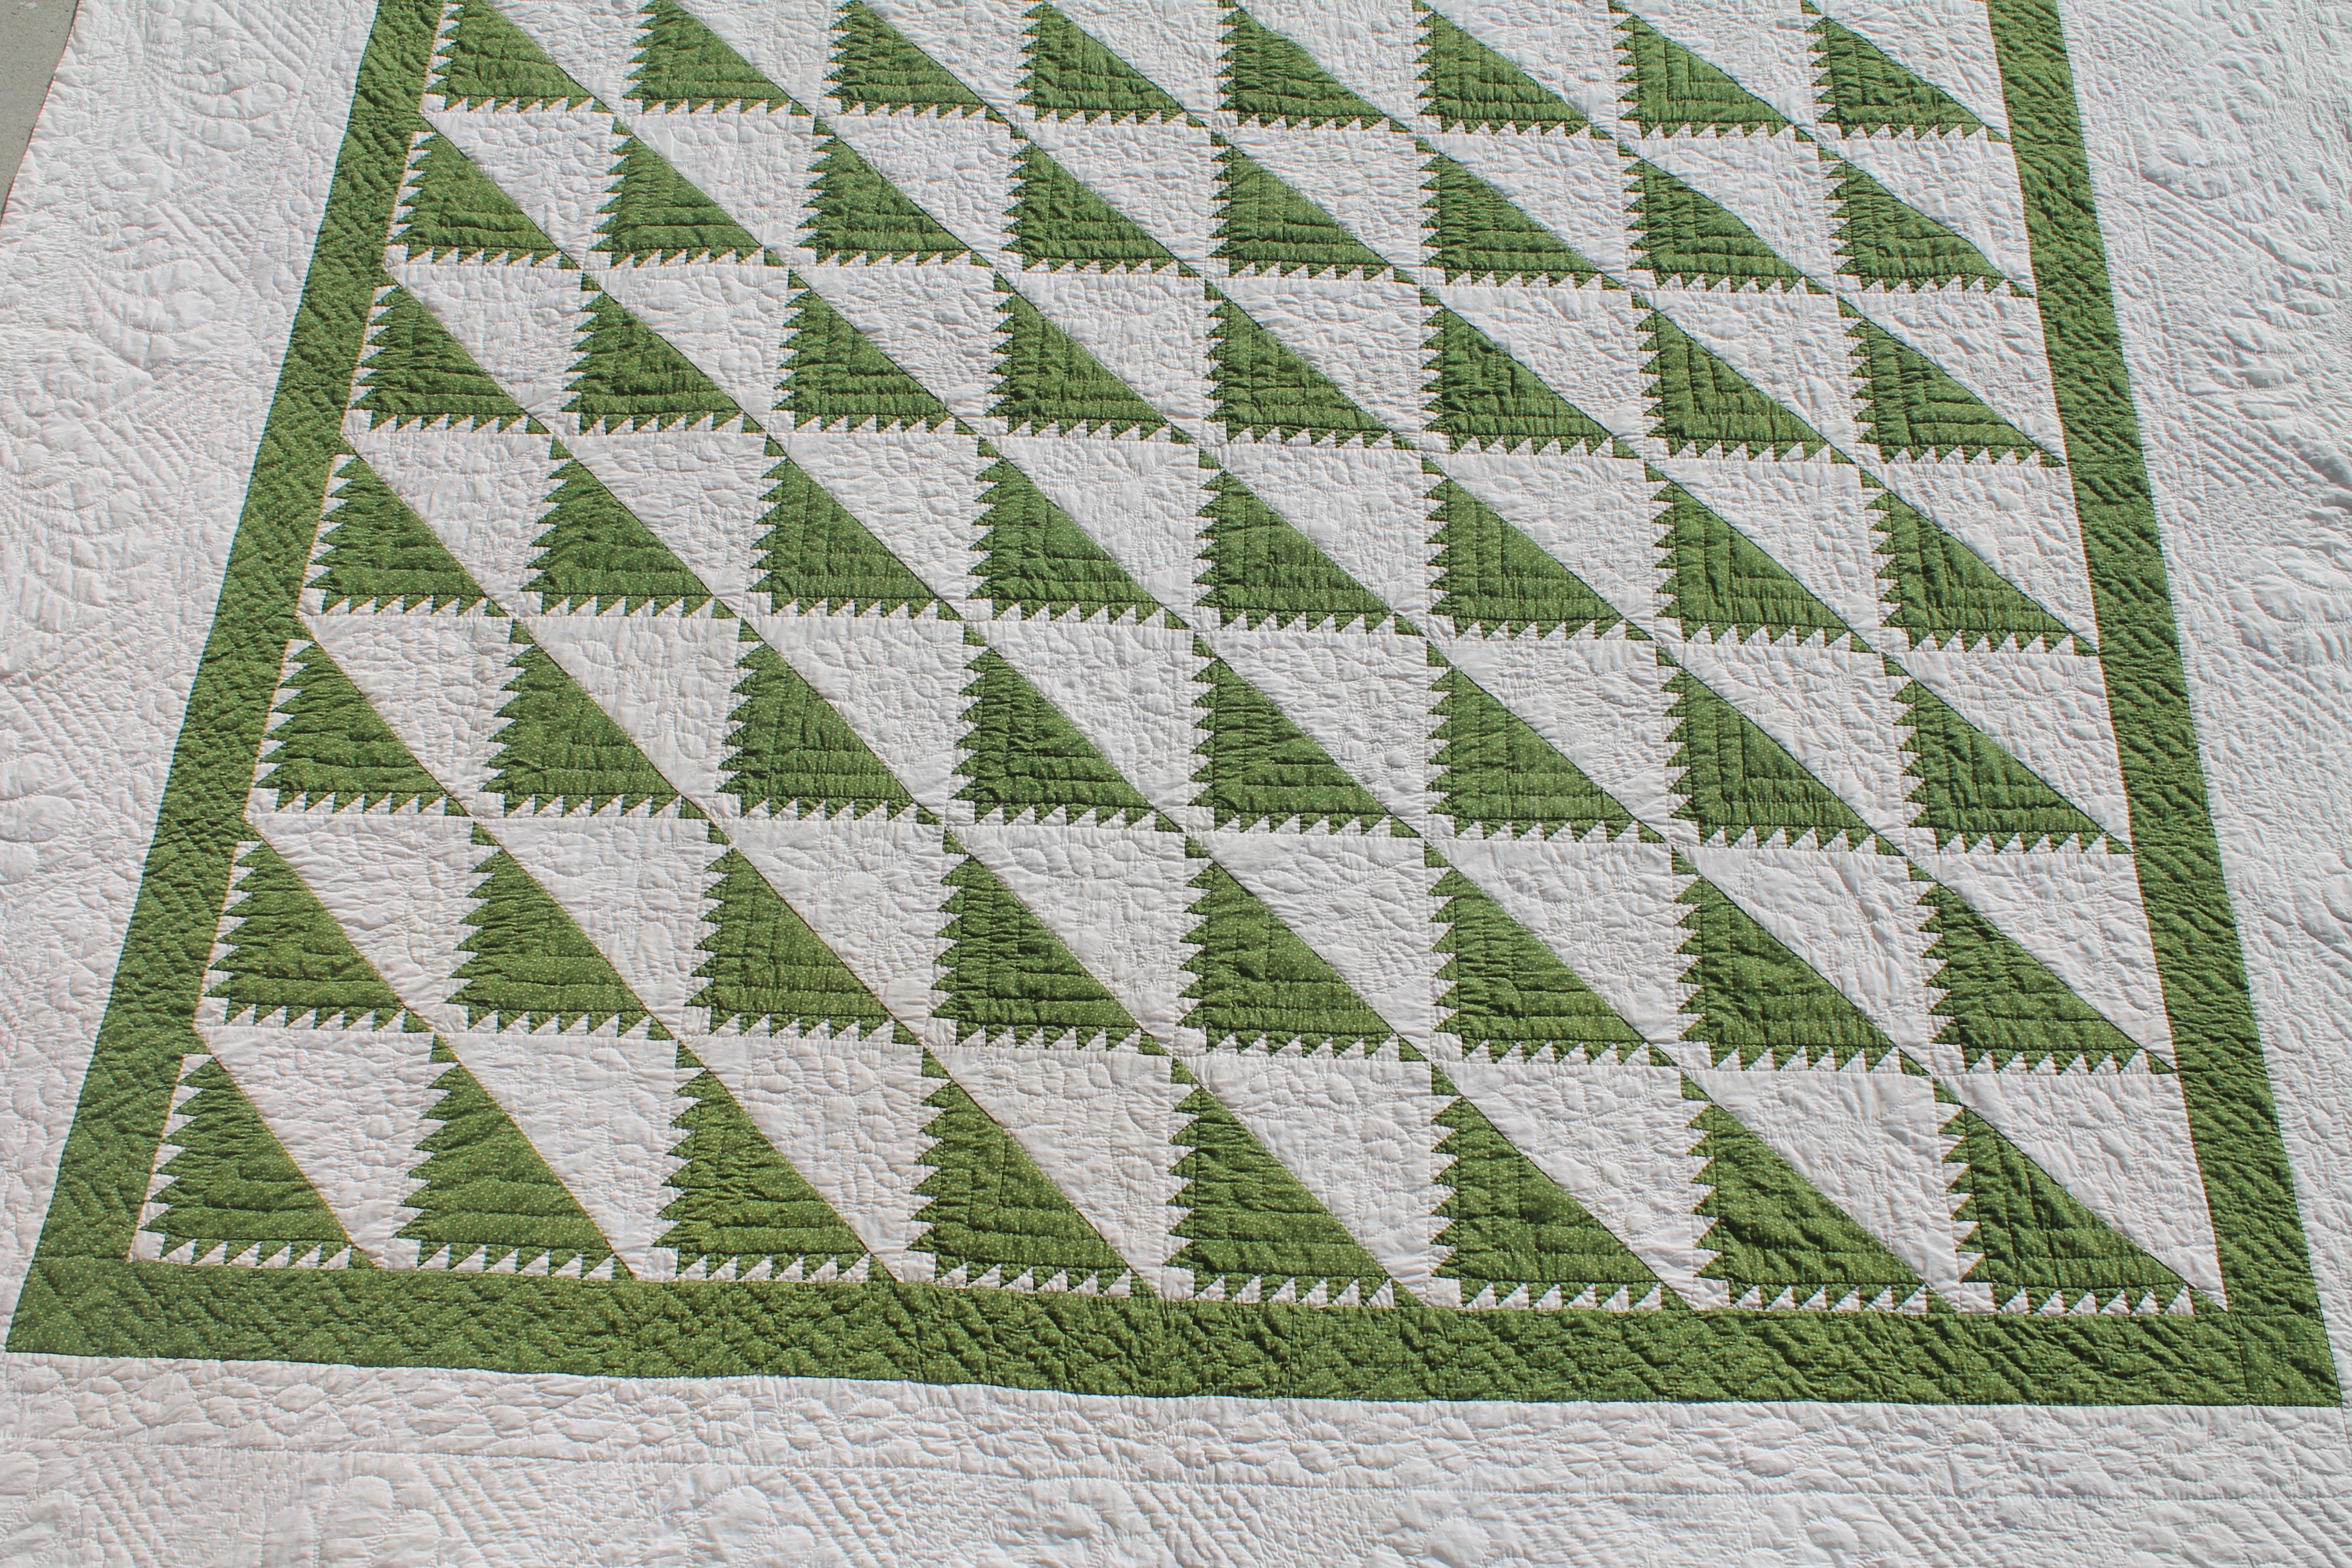 This amazing king size 19th century green and white delectable mountain pattern quilt is in pristine condition. The finest of quilting and piece work. This quilt is quite unusual size and condition.